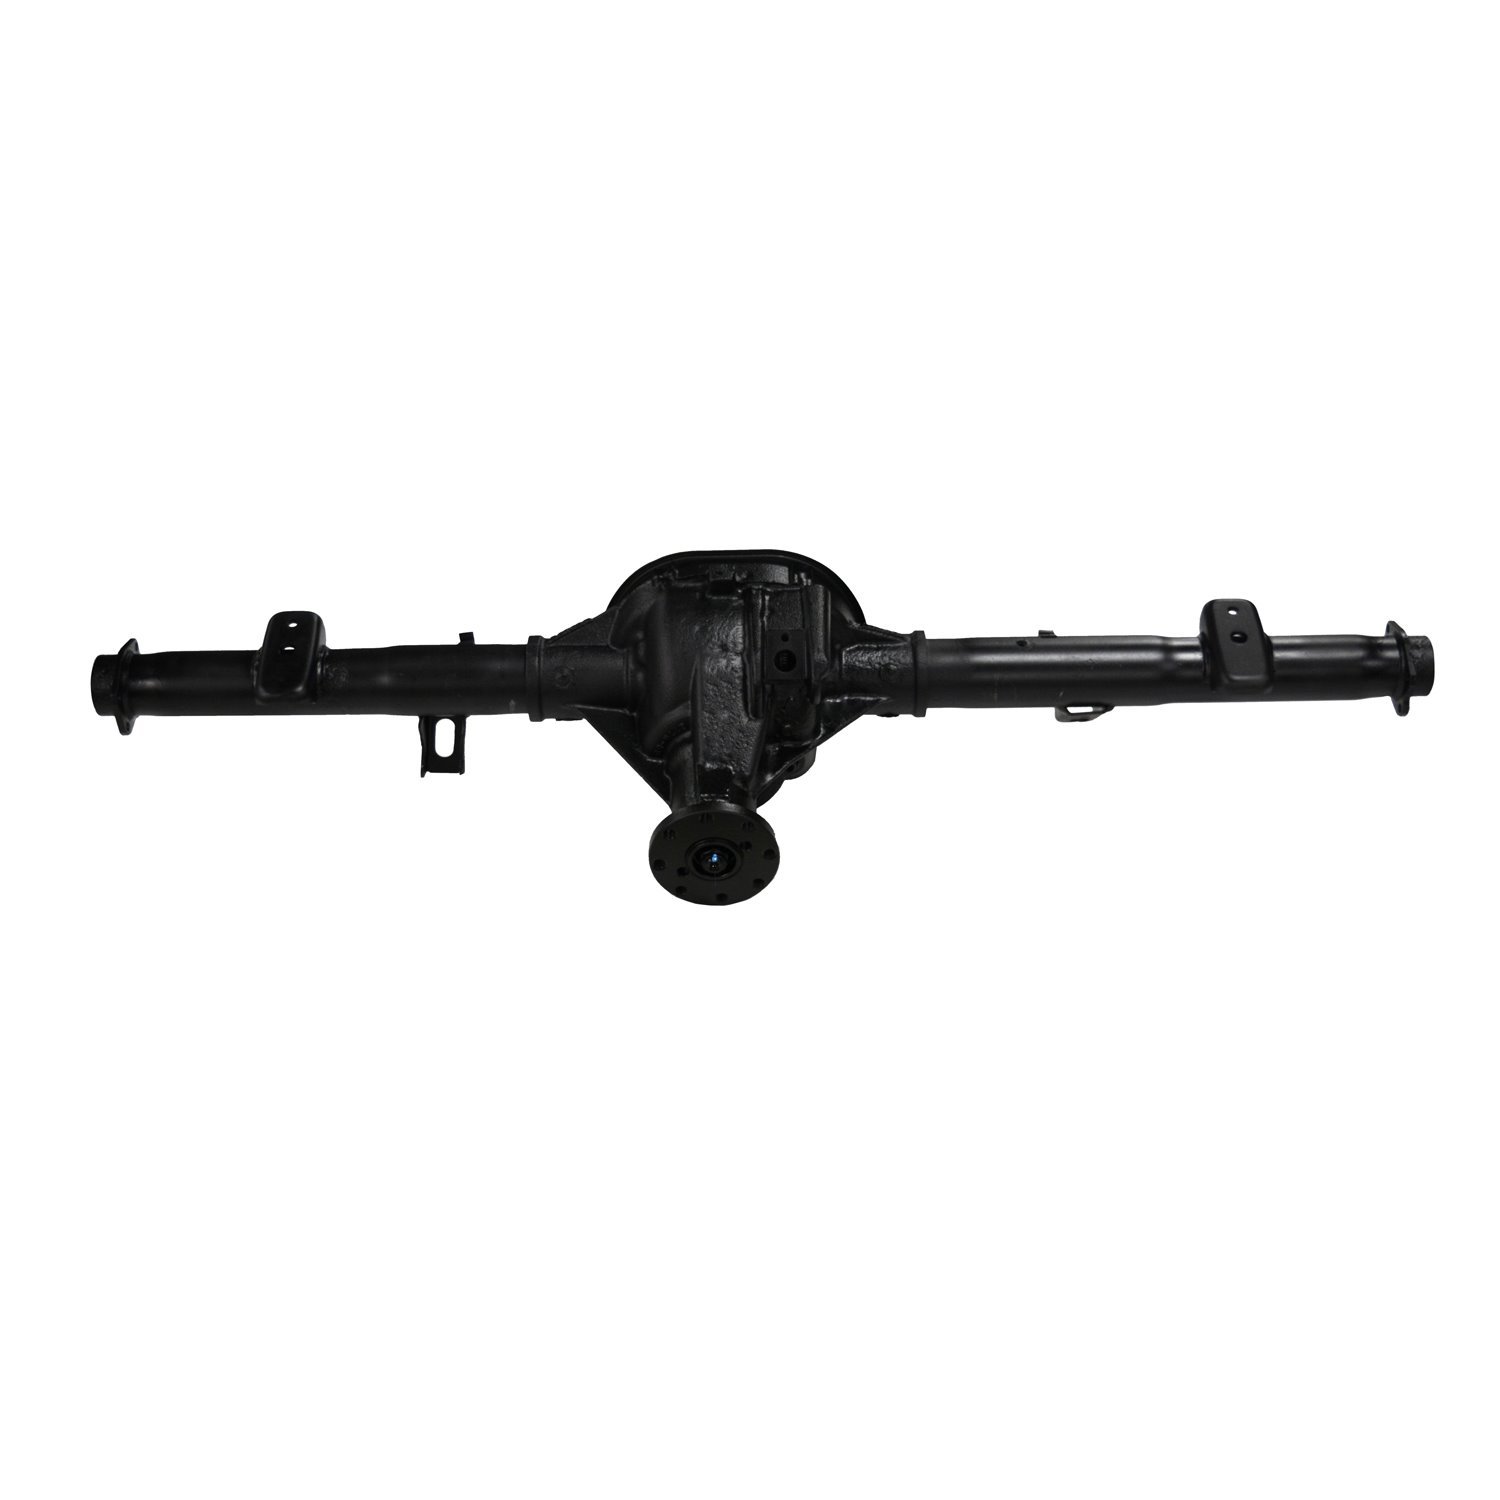 Remanufactured Complete Axle Assembly for 7.5" 1998 Ranger 3.73 , 10" Drum Brakes